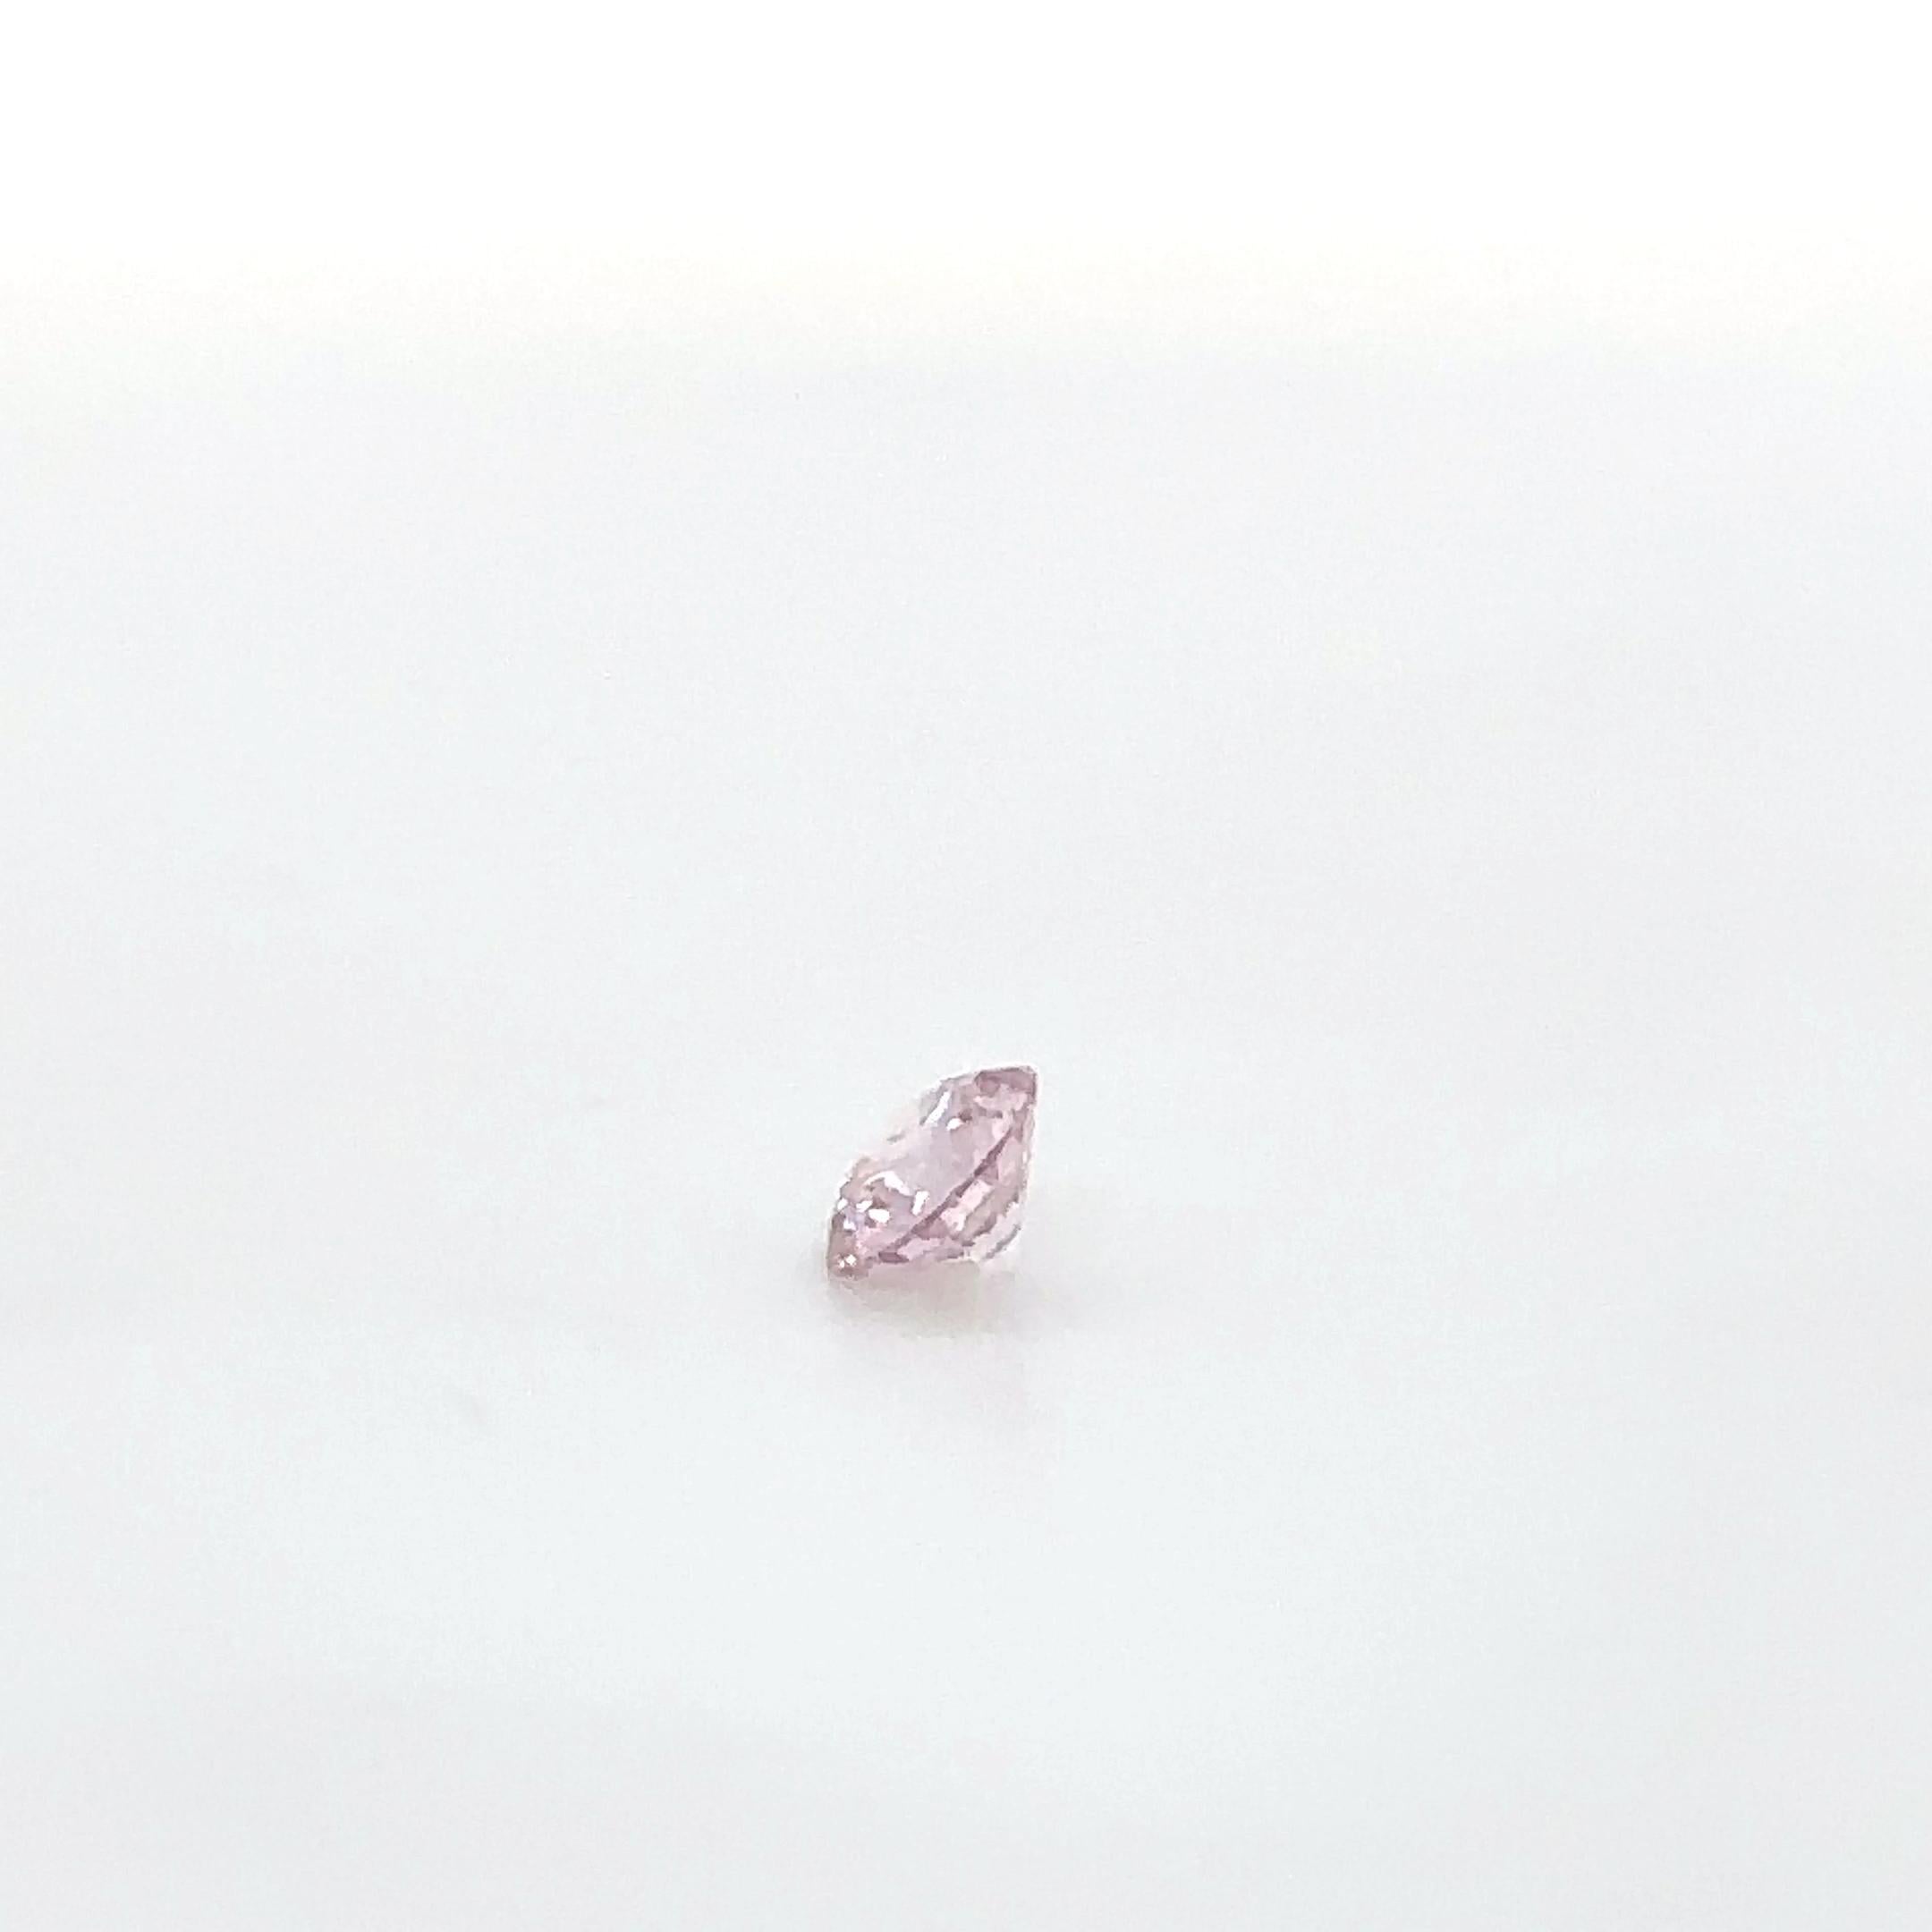 A Loose Argyle Pink Diamond, A single Round, Brilliant cut Diamond 7PP colour, SI2 clarity. Weighing 0.25ct.

Certificate provided from Argyle. With Report # 437315. Date: 18/11/2019

Metal: N/A
Carat: 0.25ct
Colour: 7PP
Clarity: SI2
Cut: Round